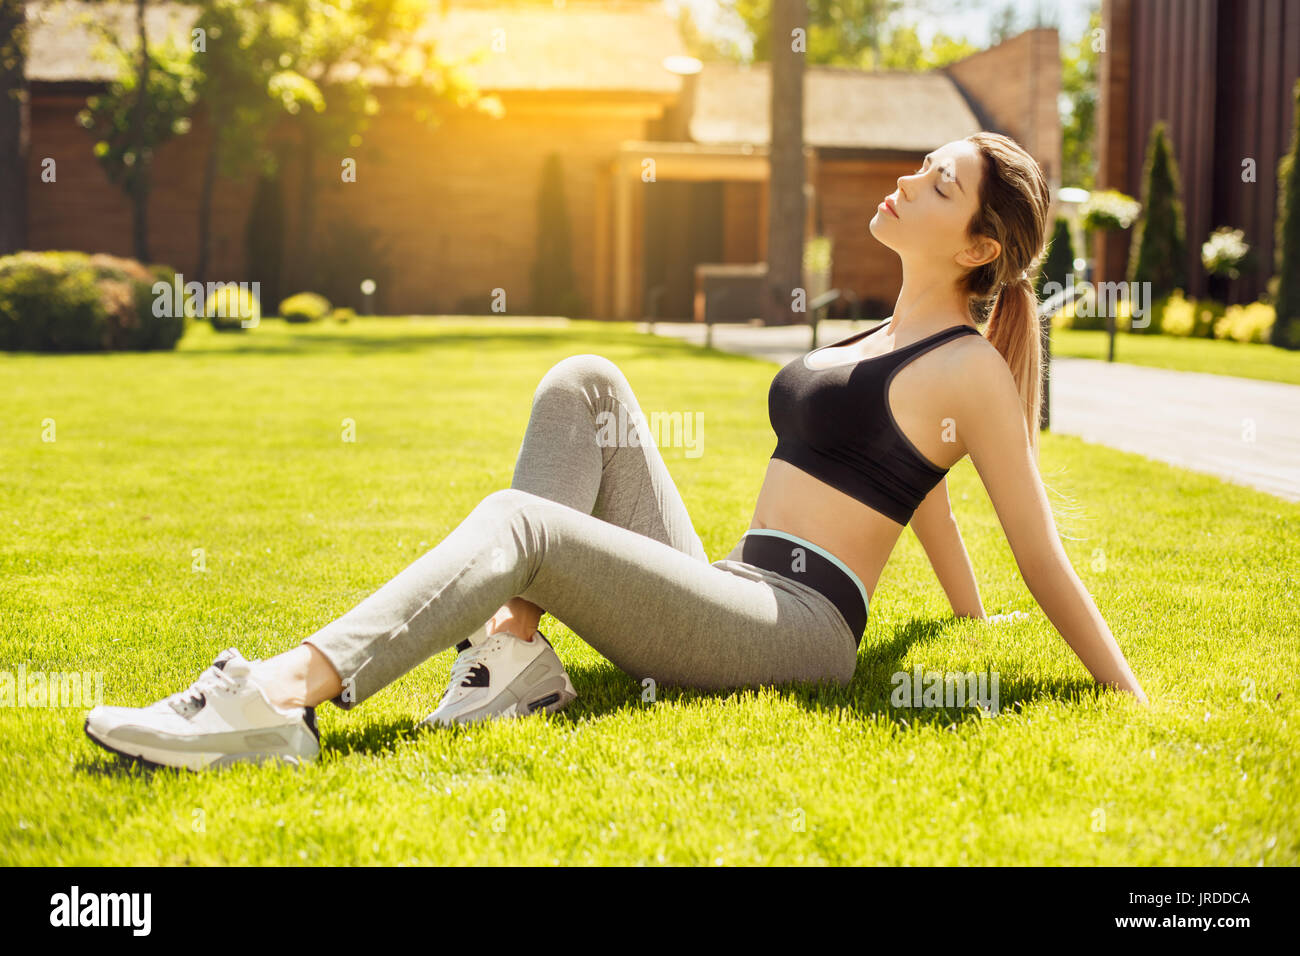 Young female exercise in the park relaxation Stock Photo